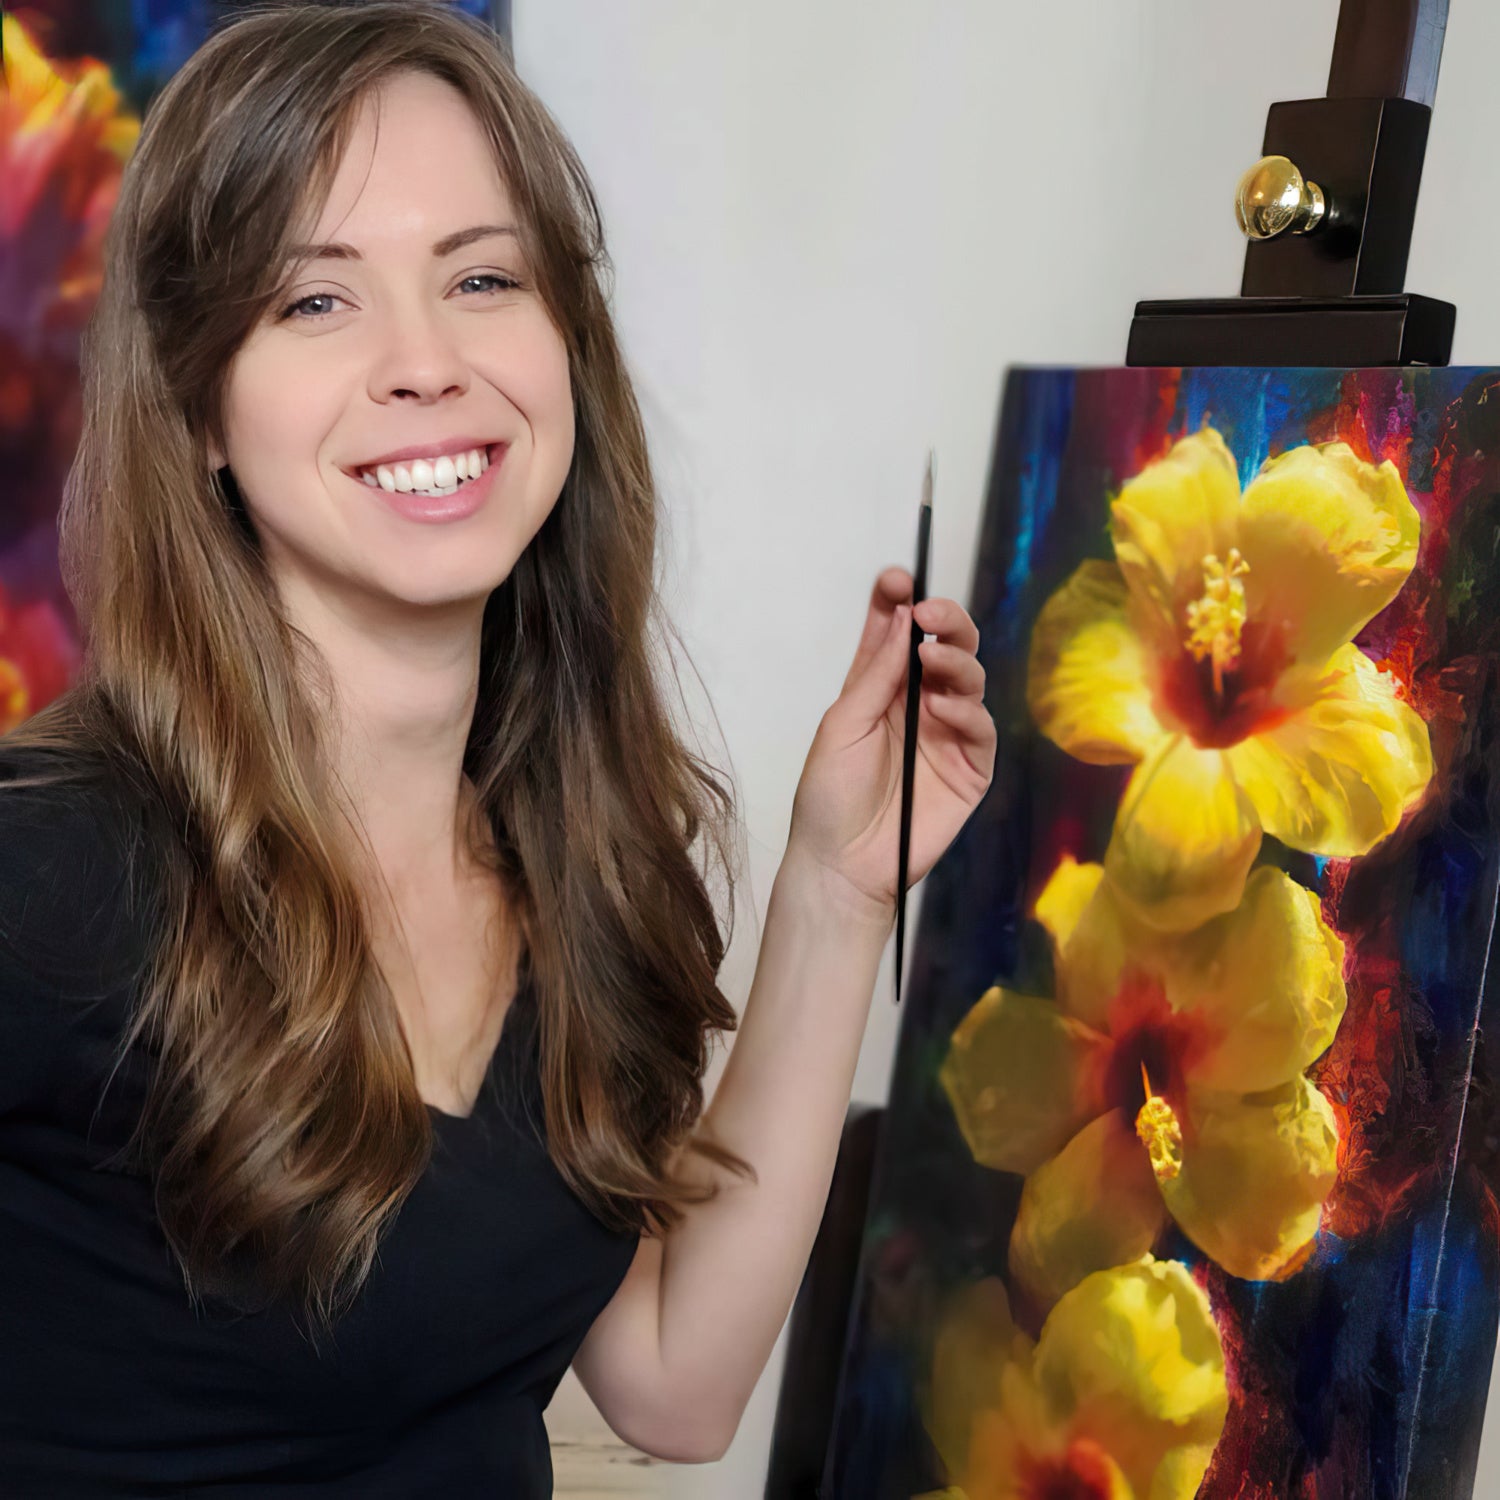 Photo of Hawaii artist Karen Whitworth in front of the Hibiscus Painting "Past Present Future". The painting depicts 3 blooming yellow hibiscus flowers.